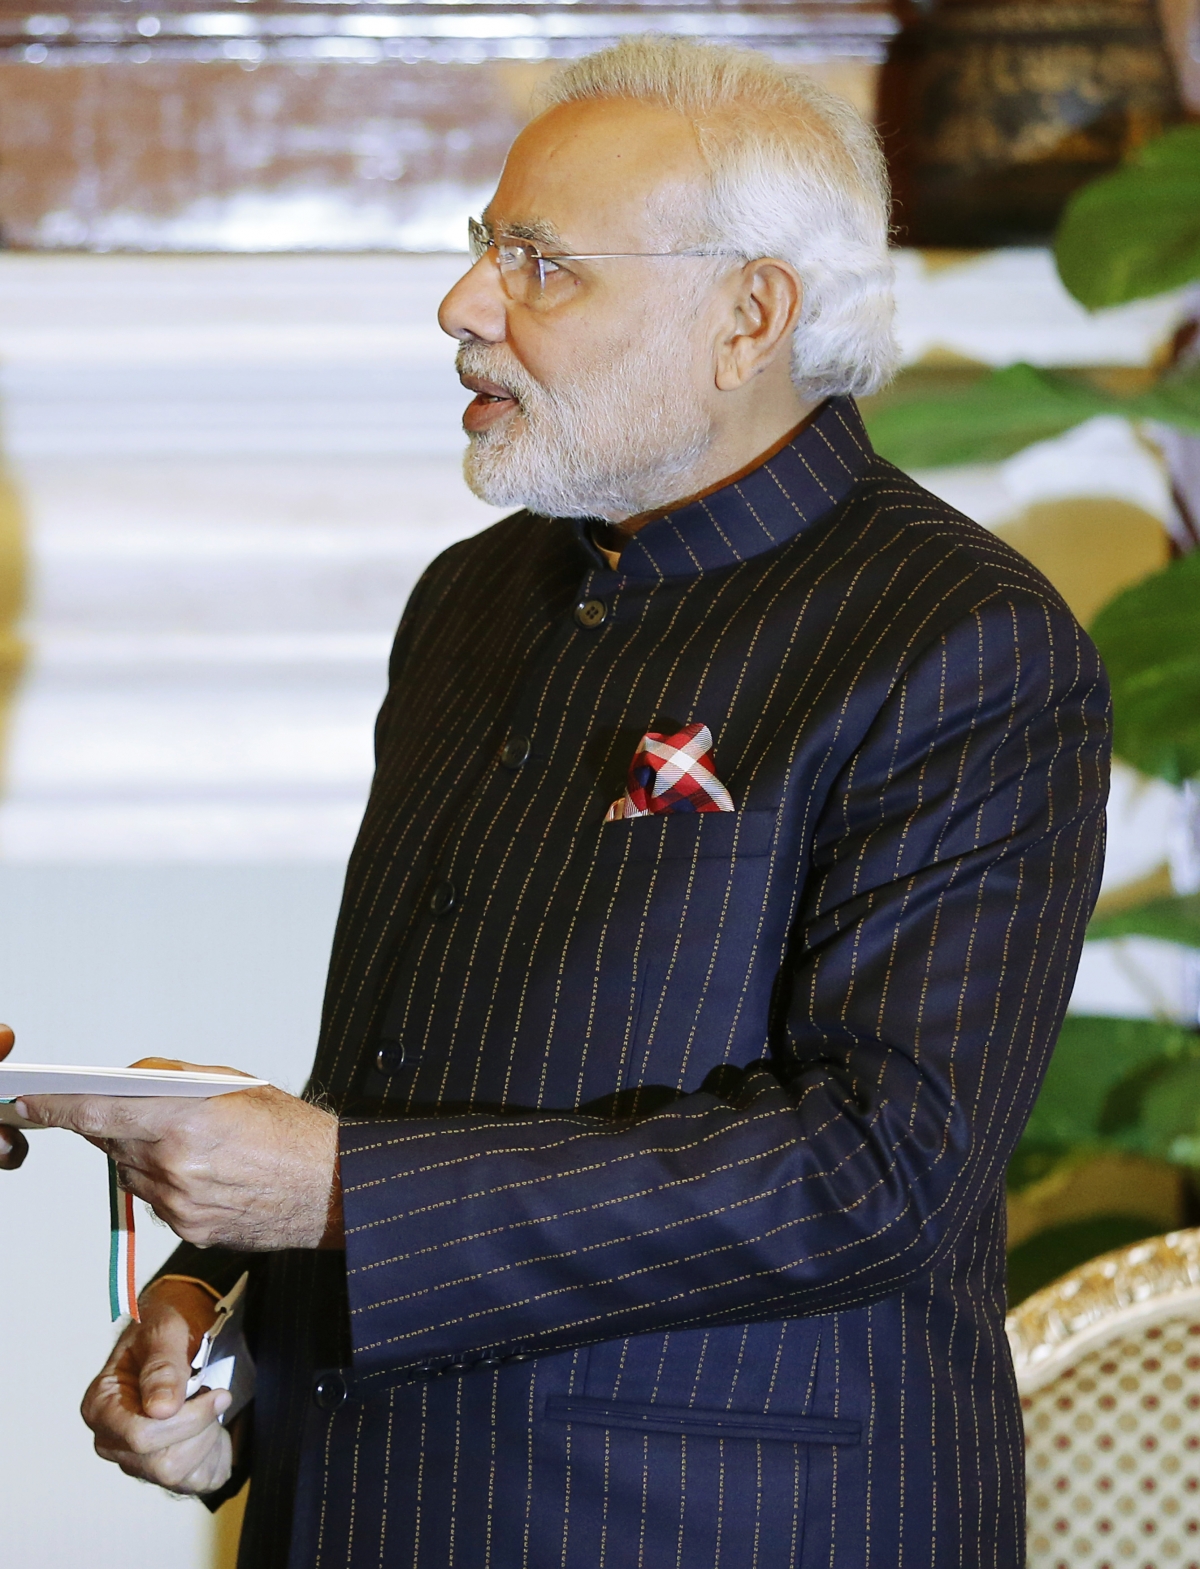 When Modi met Obama, his name was all over - his suit